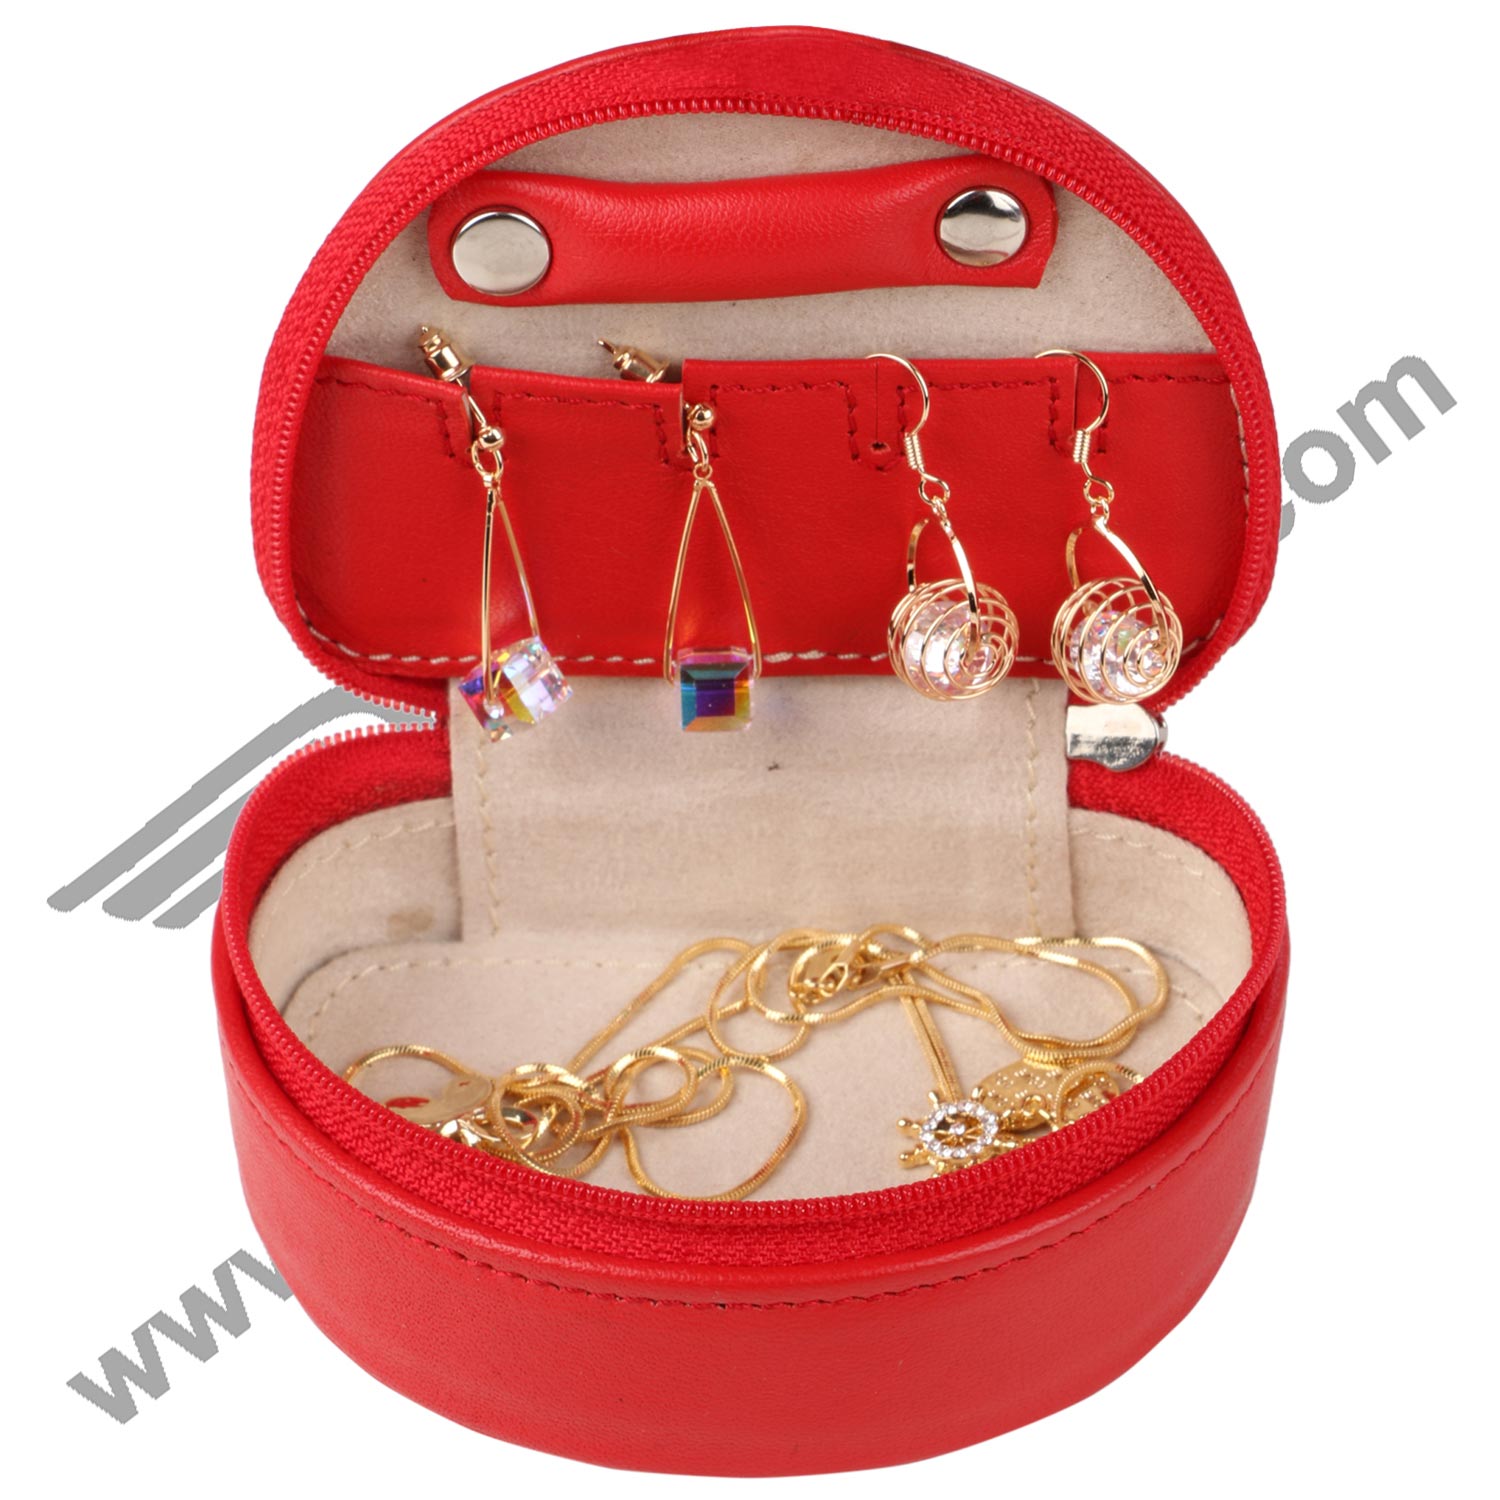 Open inside image of TRAVEL SMALL JEWELERY CASE.  Proper placement of jewelery depicted. Spacious and strudy